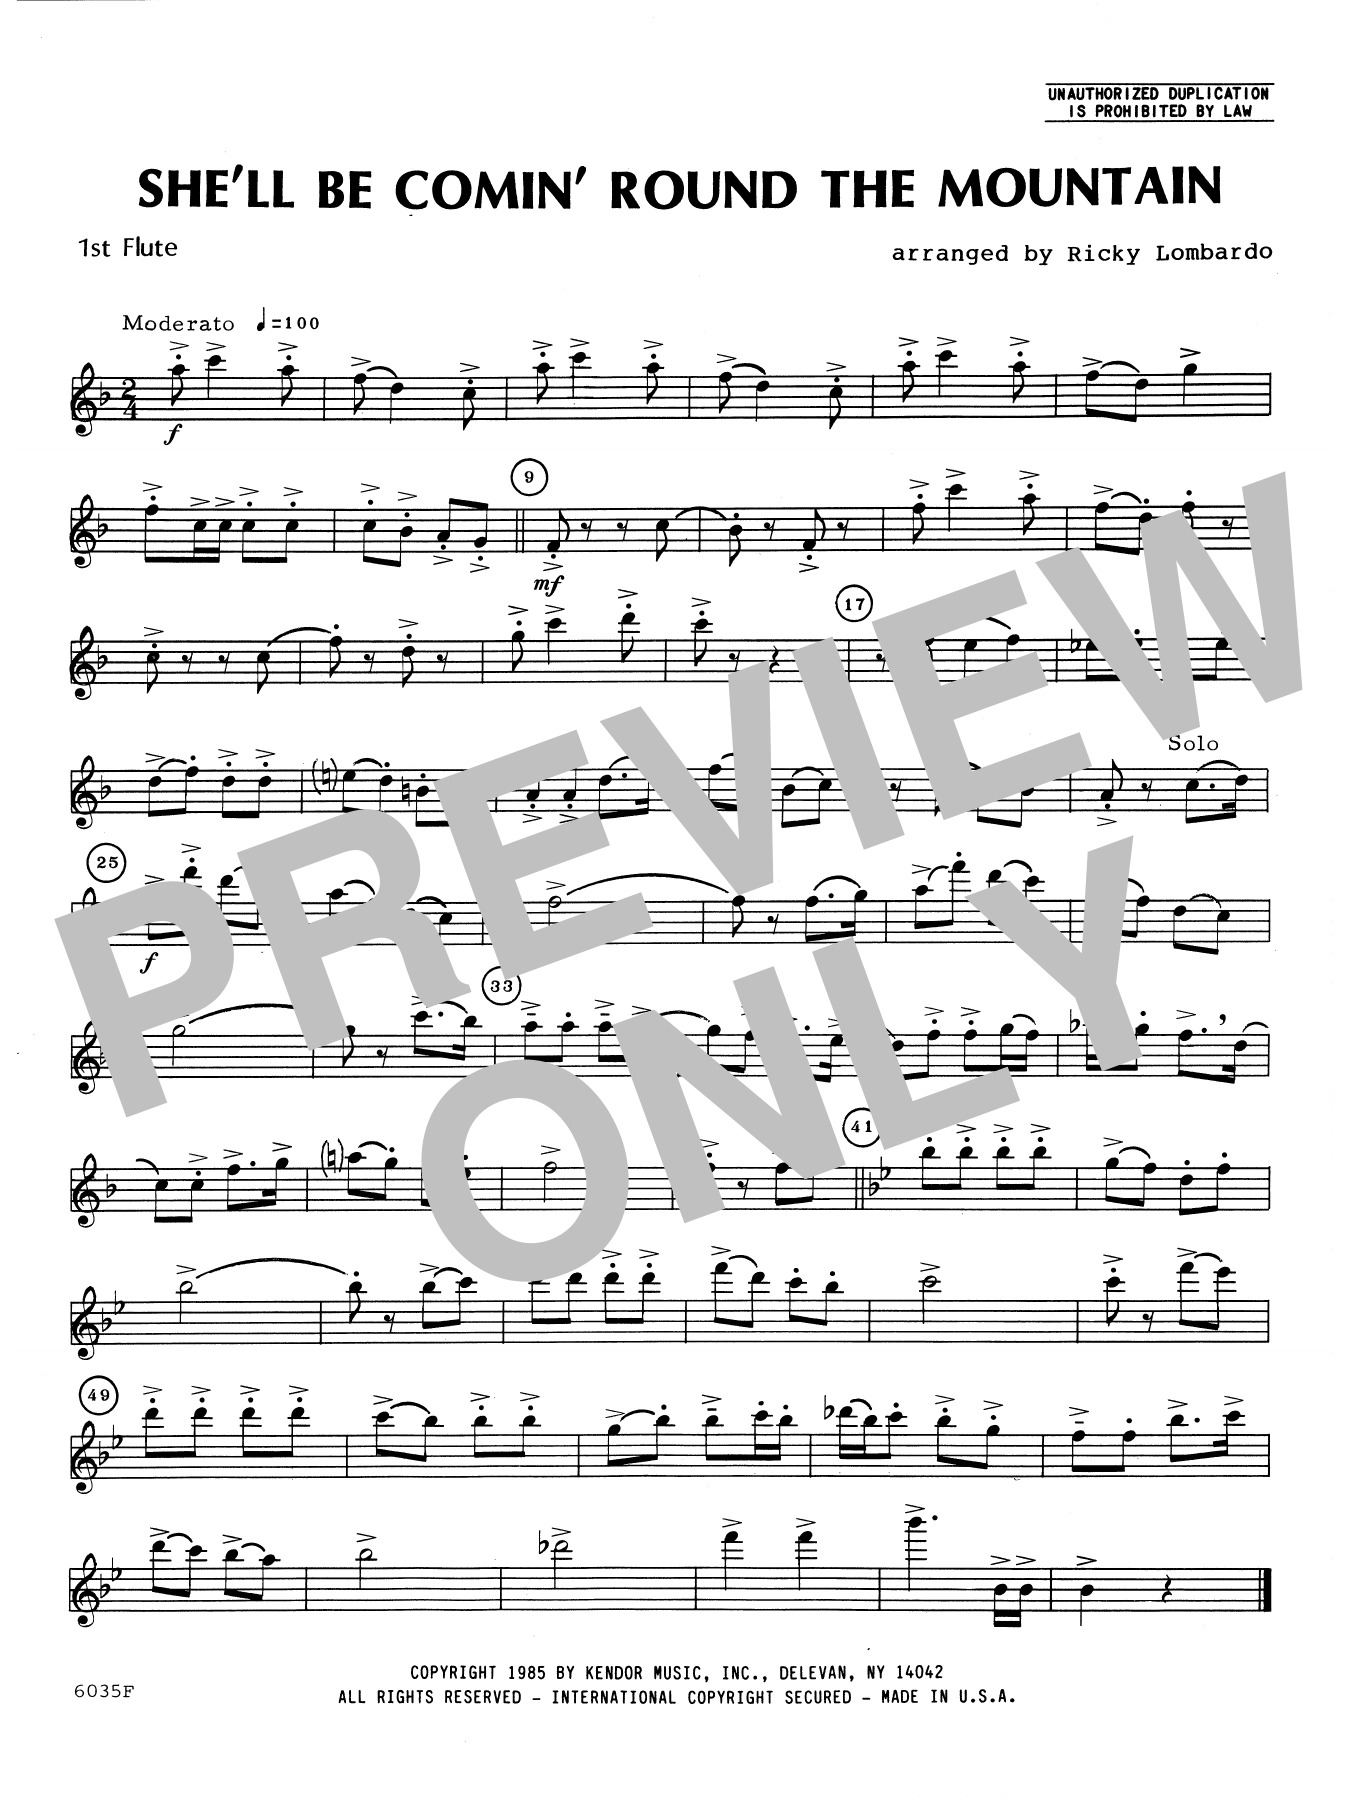 Download Ricky Lombardo She'll Be Comin' Round the Mountain - 1 Sheet Music